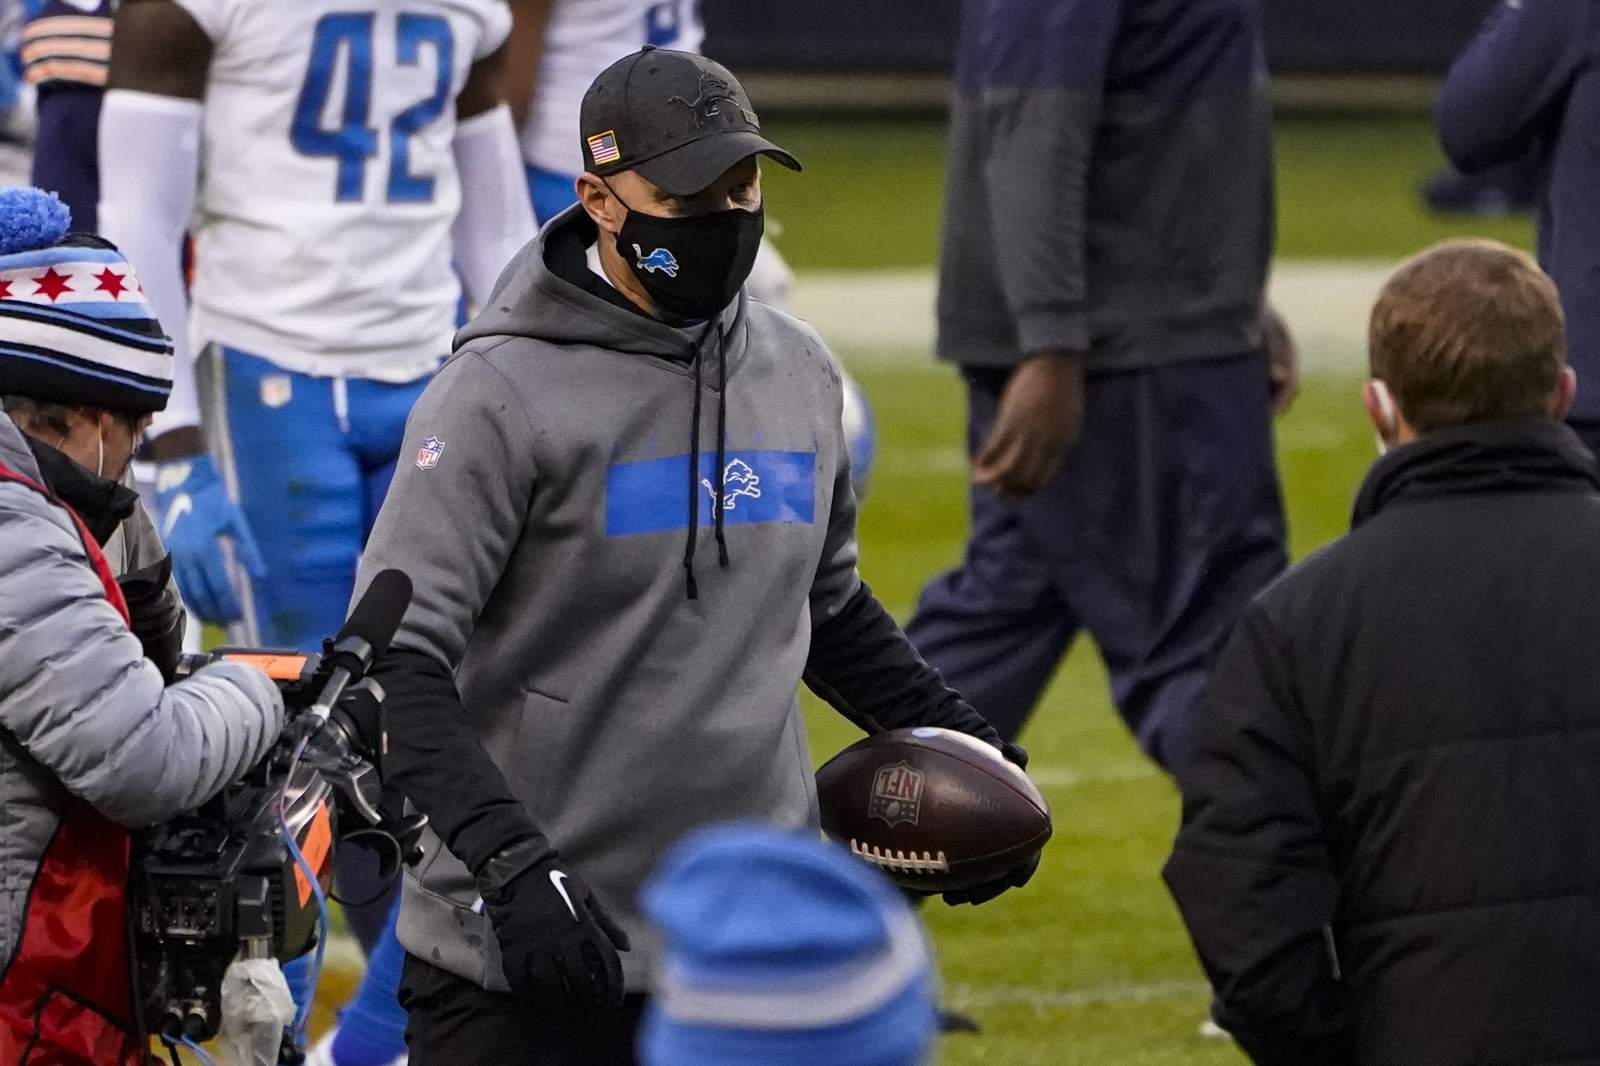 Lions' Bevell can't coach vs Bucs due to COVID protocols